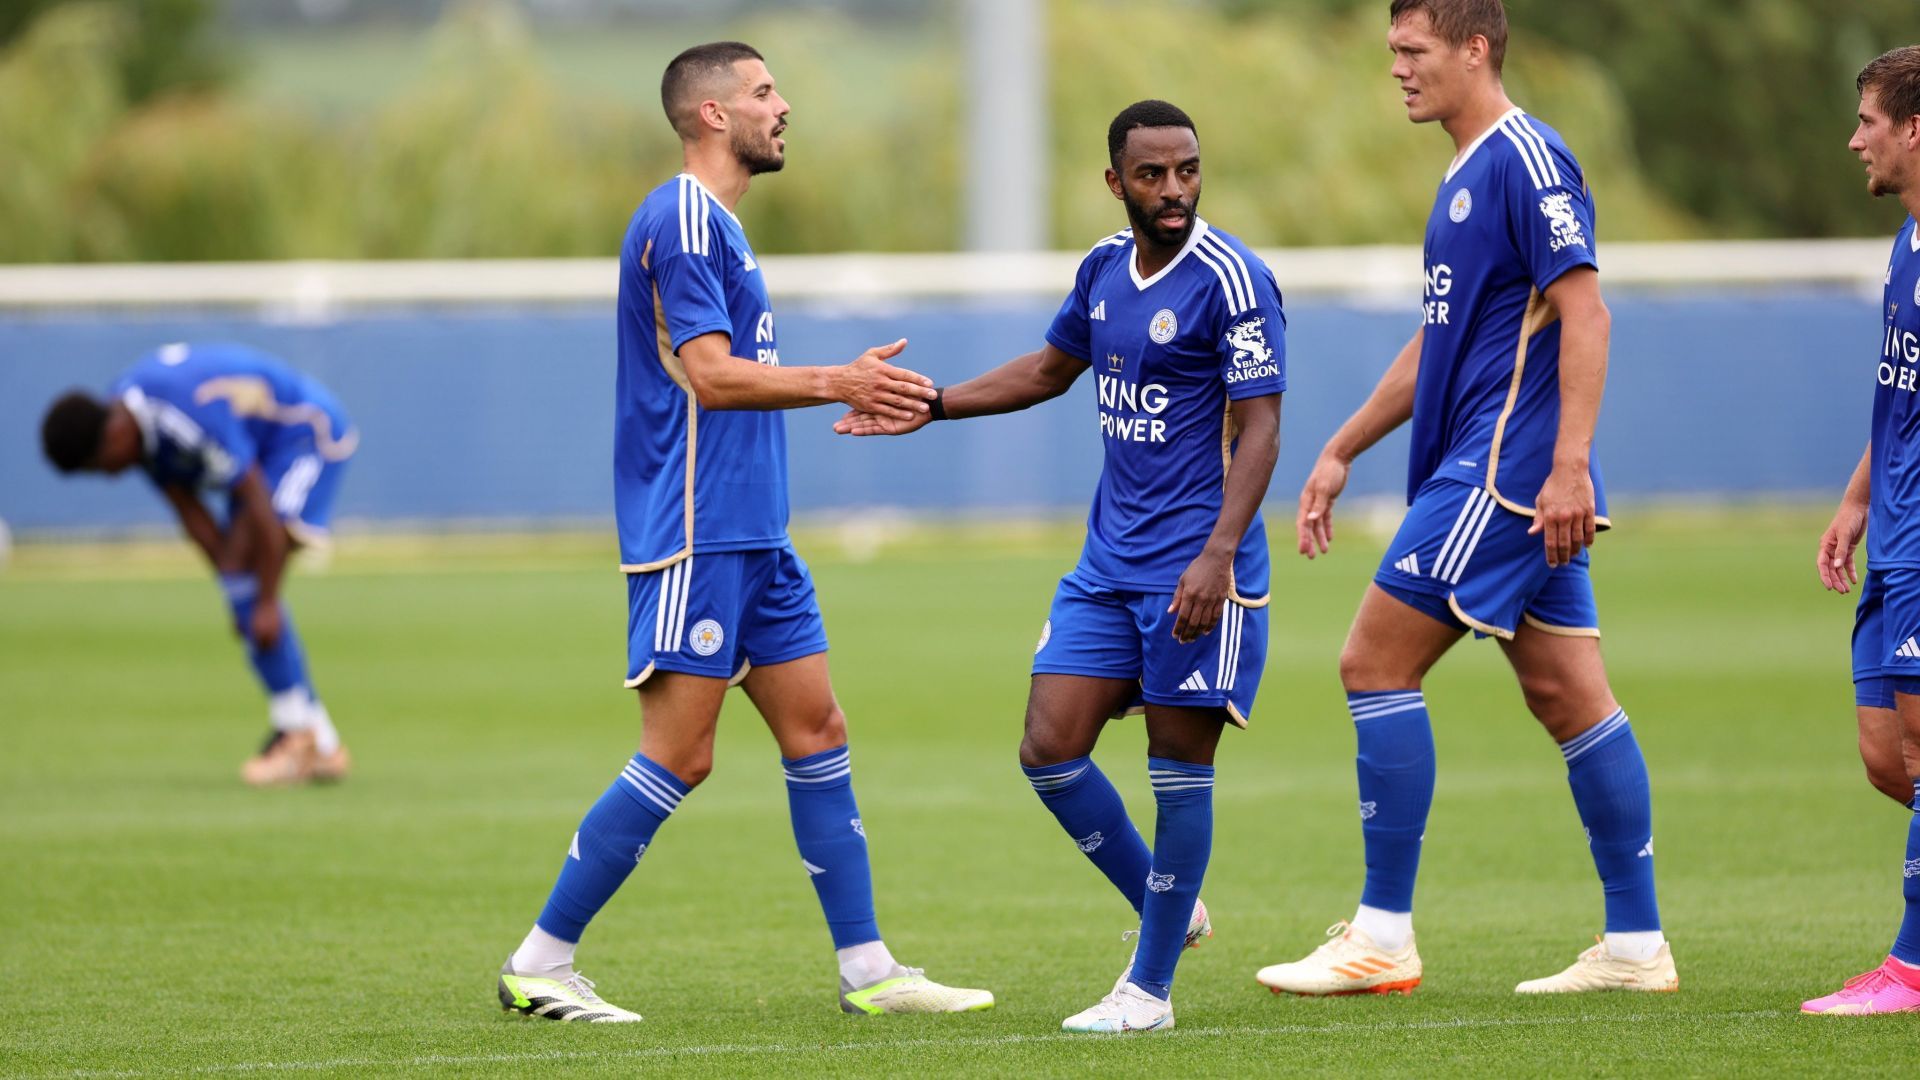 Leicester City face Northampton Town in a friendly on Saturday